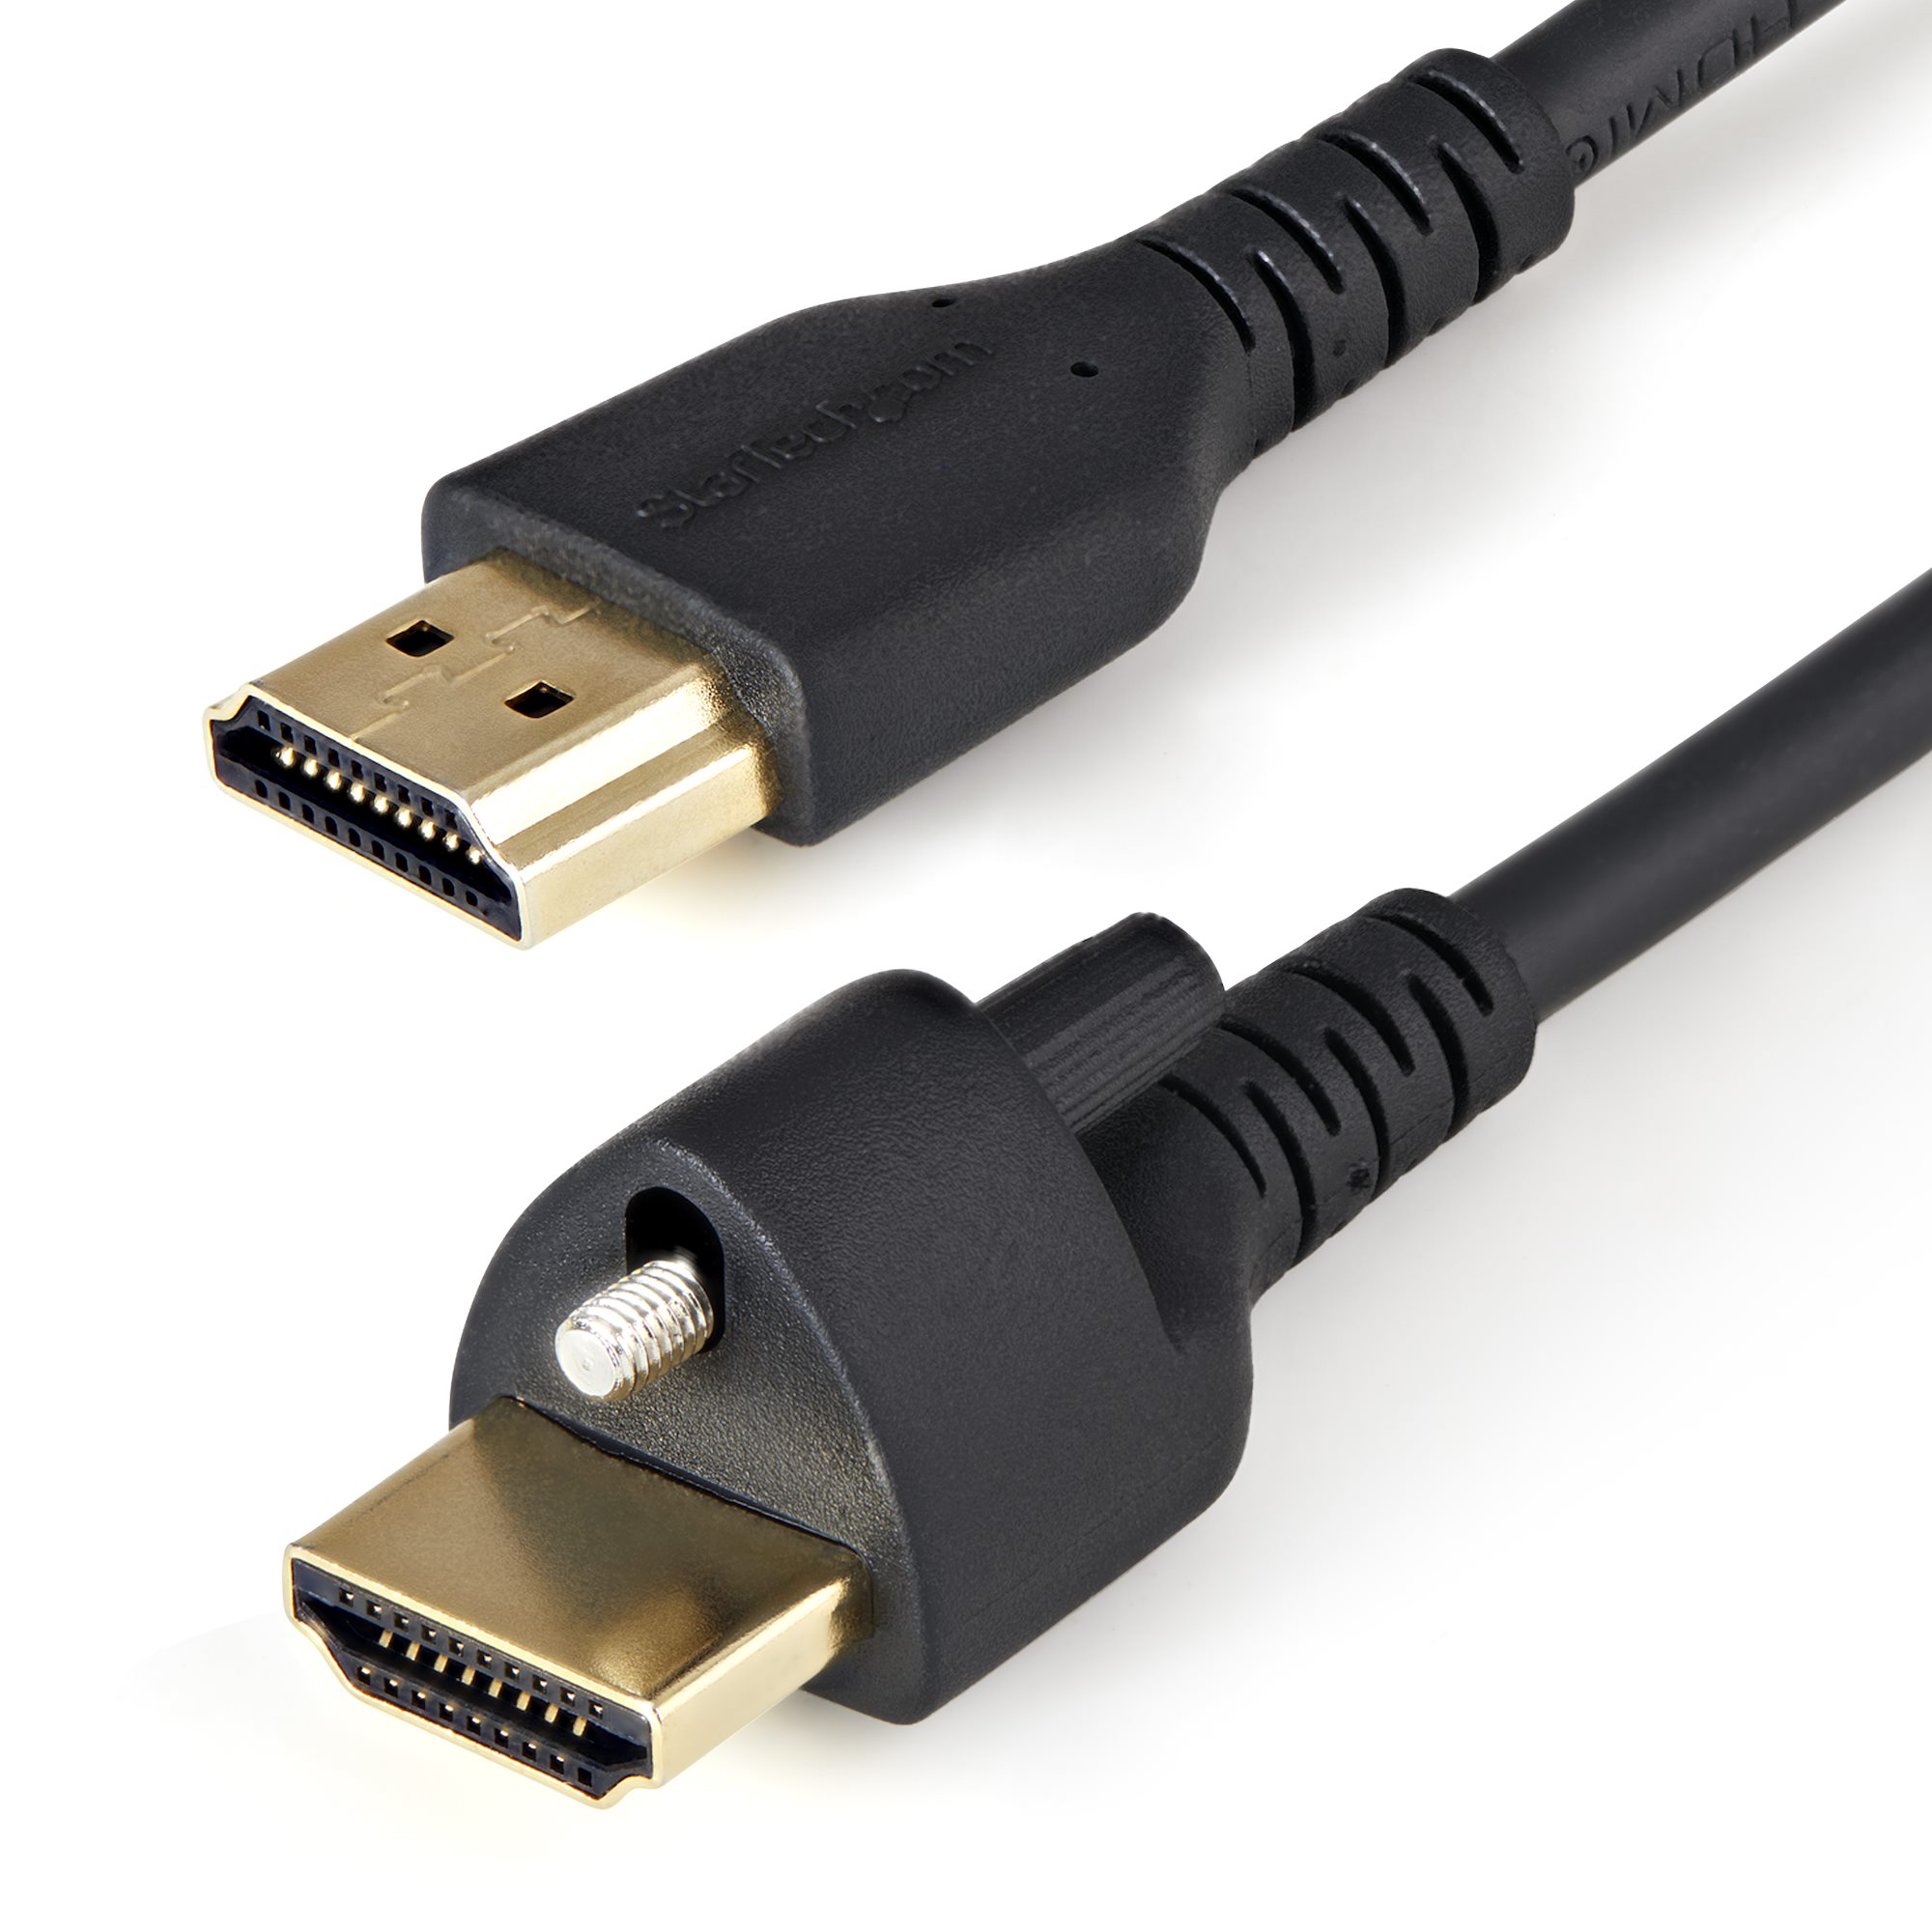 1m (3ft) HDMI Cable with Locking Screw - 4K 60Hz HDR - High Speed HDMI 2.0  Monitor Cable with Locking Screw Connector for Secure Connection - HDMI